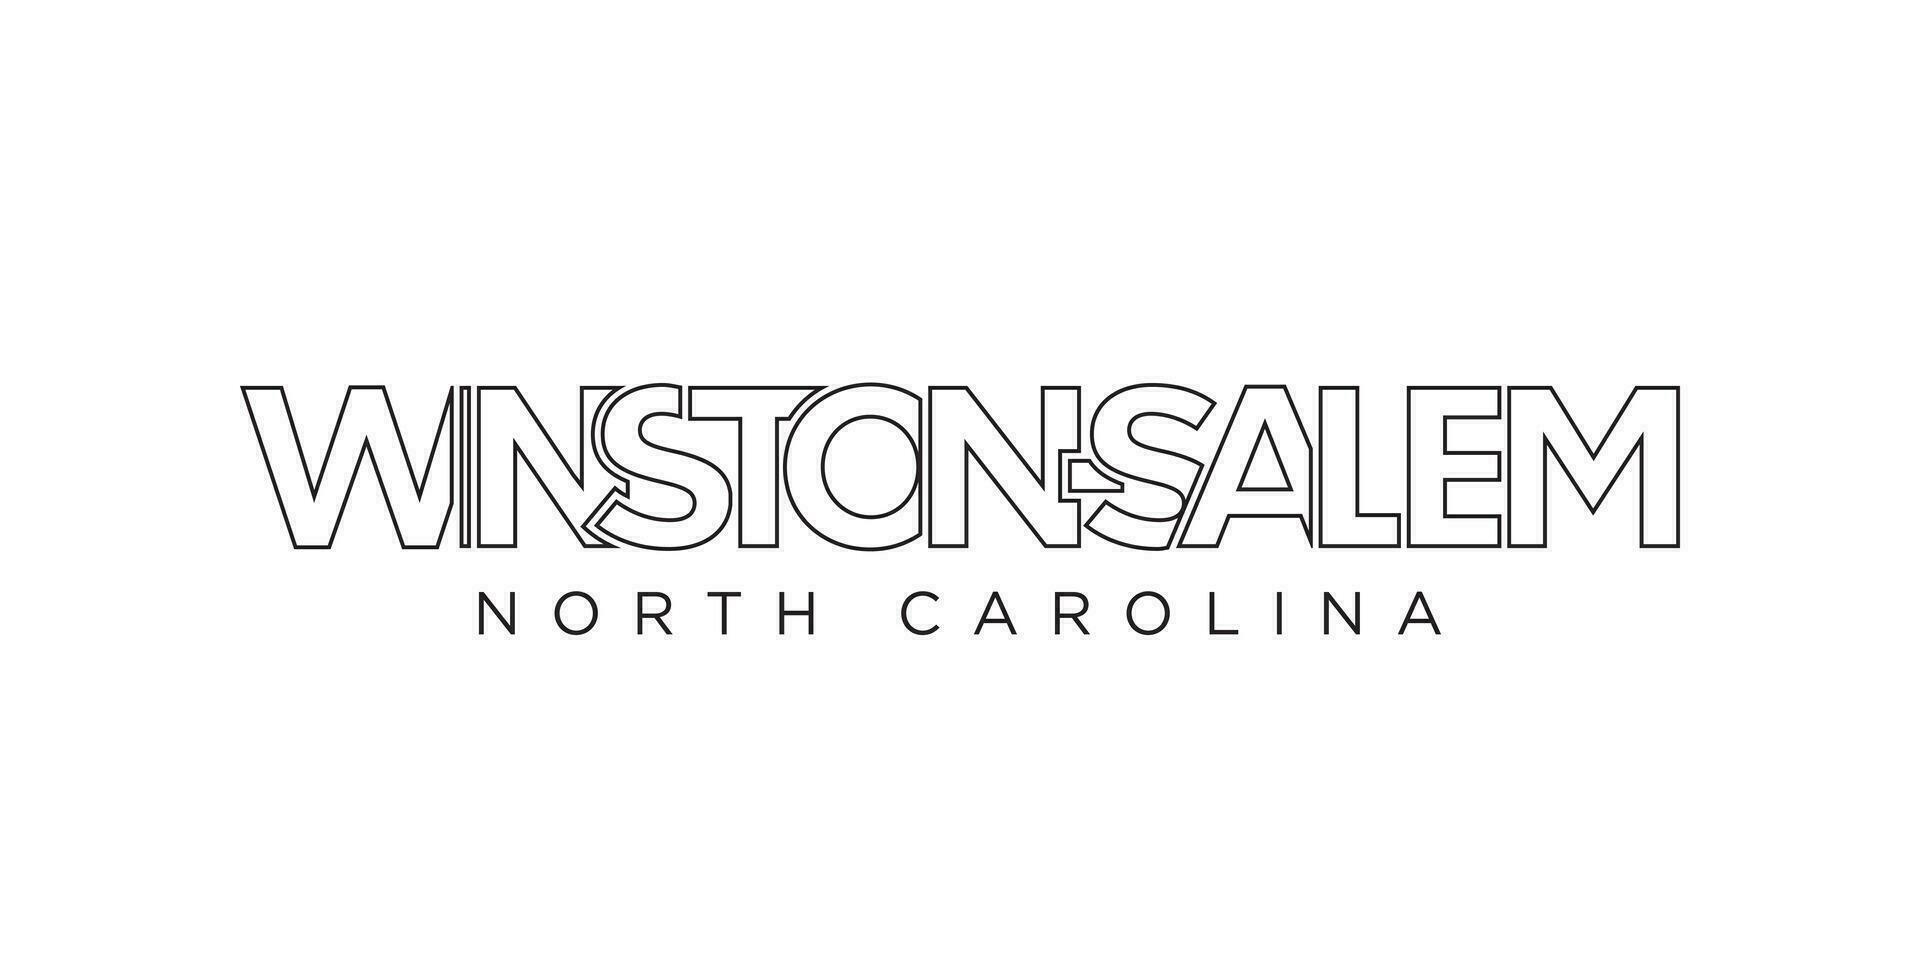 Winston Salem, North Carolina, USA typography slogan design. America logo with graphic city lettering for print and web. vector